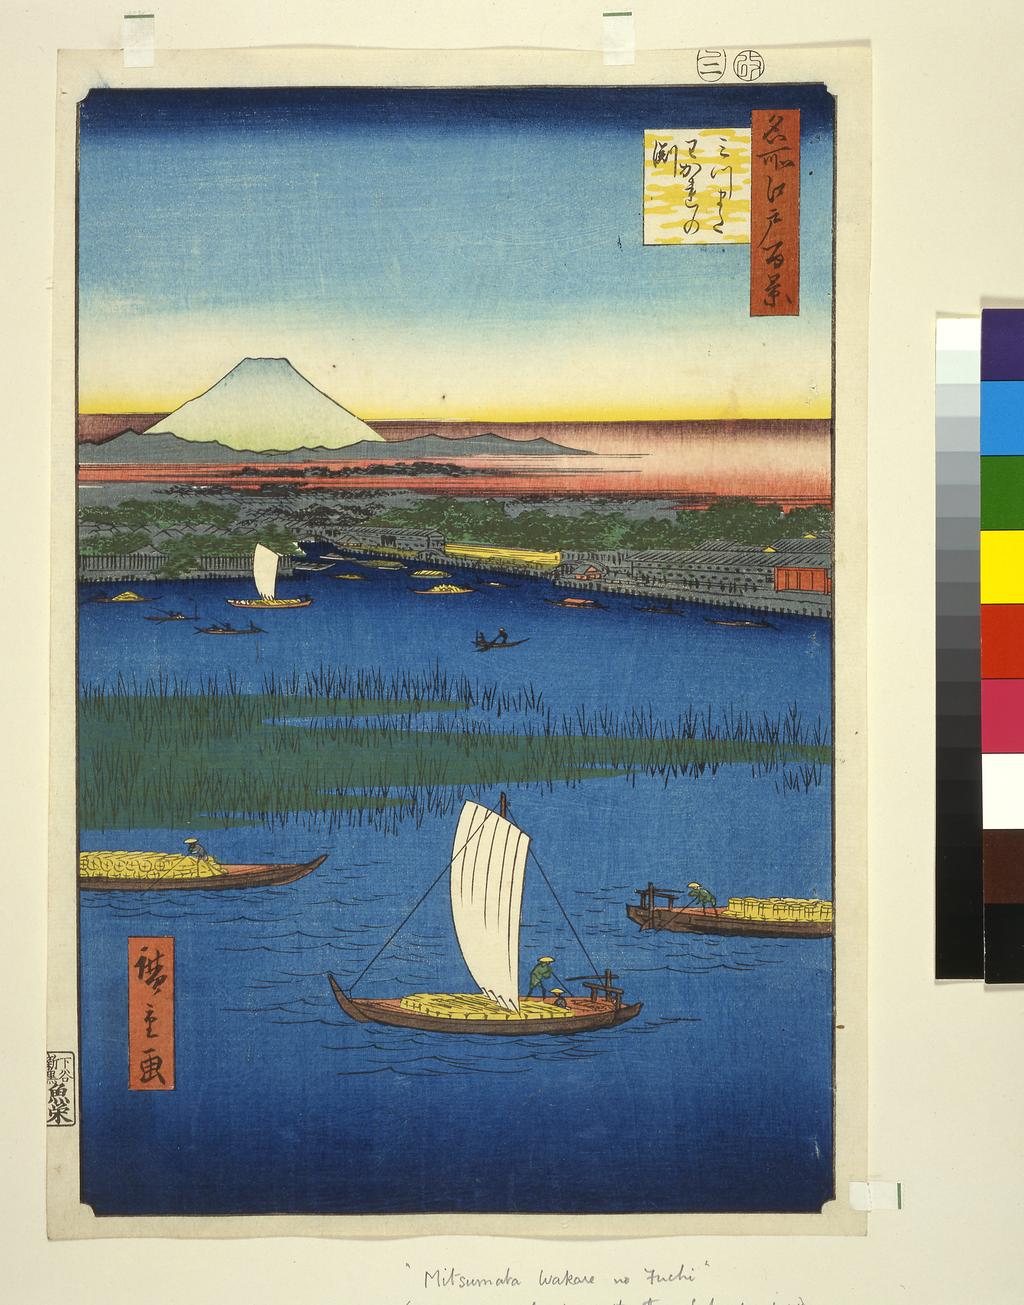 An image of Mitsumata Wakarenofuchi  (Island off the mouth of the Sumida river). Hiroshige, Utagawa (Japanese, 1797-1858). Colour print from woodblocks. Ôban. Signed: Hiroshige ga. Publisher: Uoei (Uoya Eikichi). Date seal: Snake 2 (2/1857). Censor’s seal: aratame. 1857. Ukiyo-e. Notes: No. 57 from the series Meisho Edo hyakkei (One hundred famous views of Edo), in the section for Summer. A view from the east bank, near Mannen Bridge, over the widest stretch of the Sumida river towards Mount Fuji. The name Wakarenofuchi - ‘dividing pool’ - referred to the mixture of fresh water and tidal water from Edo Bay (out of the view to the left). In the distance is the entrance to the Hakozaki Canal. The island the left of was filled with the mansions of feudal lords (daimyo). The area in filled with reeds had been the site of an artificial island constructed in the 1770s and forming one of the main pleasure districts of the city until its destruction in 1789 as part of the governments reforms. The boats in the foreground are laden with rice, sake and cotton. An alternative printing has a differently coloured cartouche and red instead of yellow along the top of the clouds.